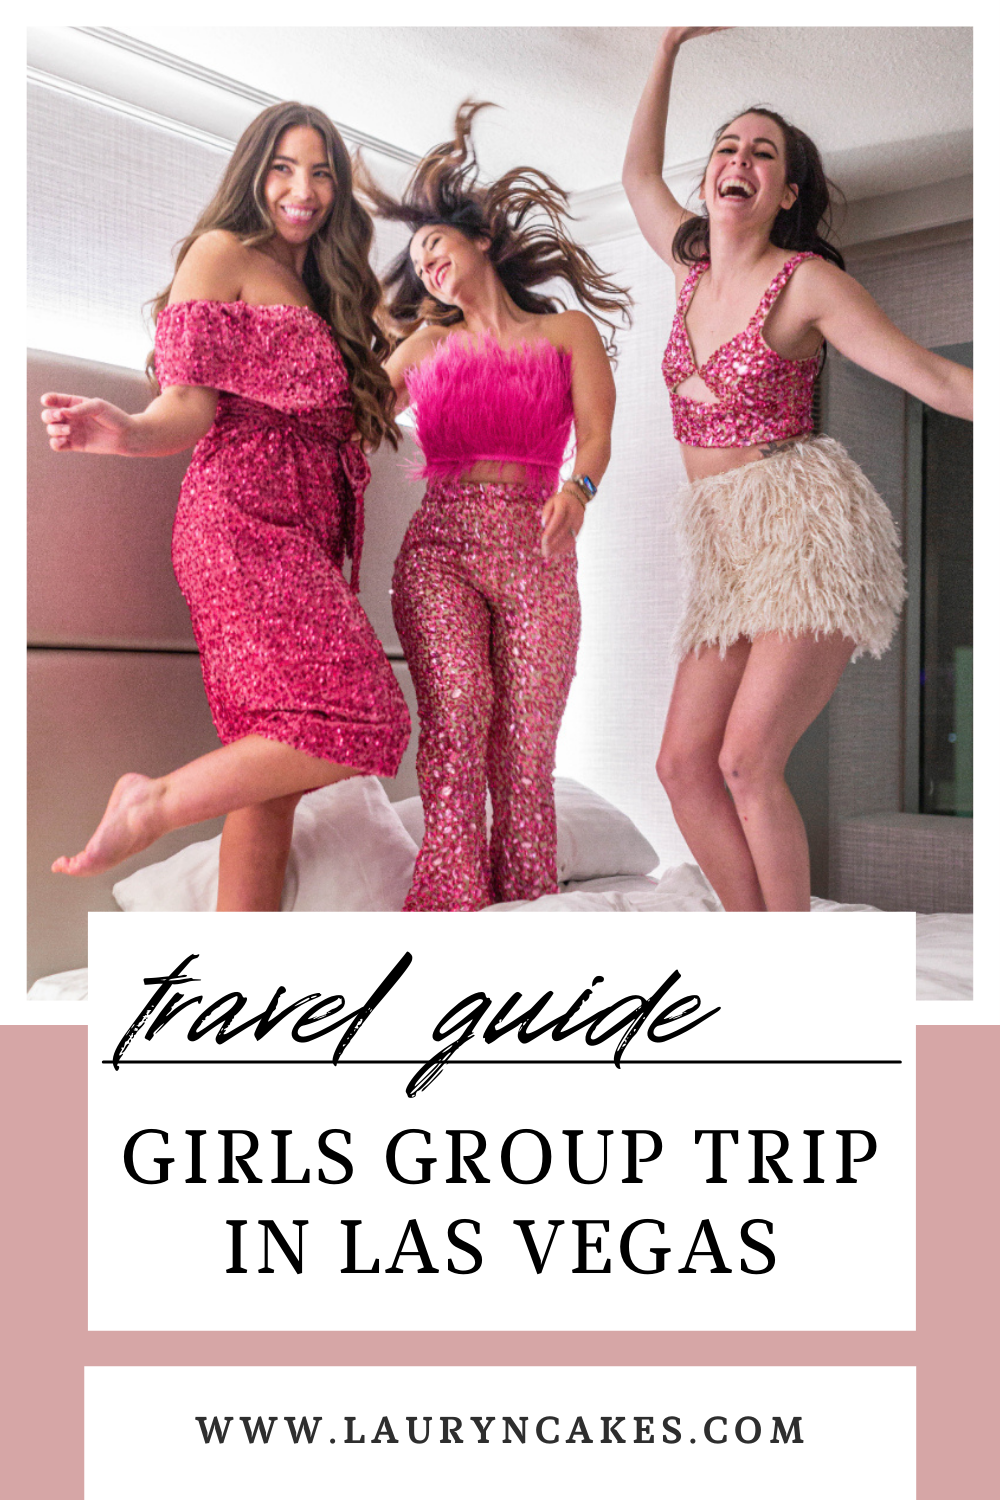 three women wearing pink party outfits jump on a bed. Text over the image says , "travel guid, girls group trip in Las Vegas"